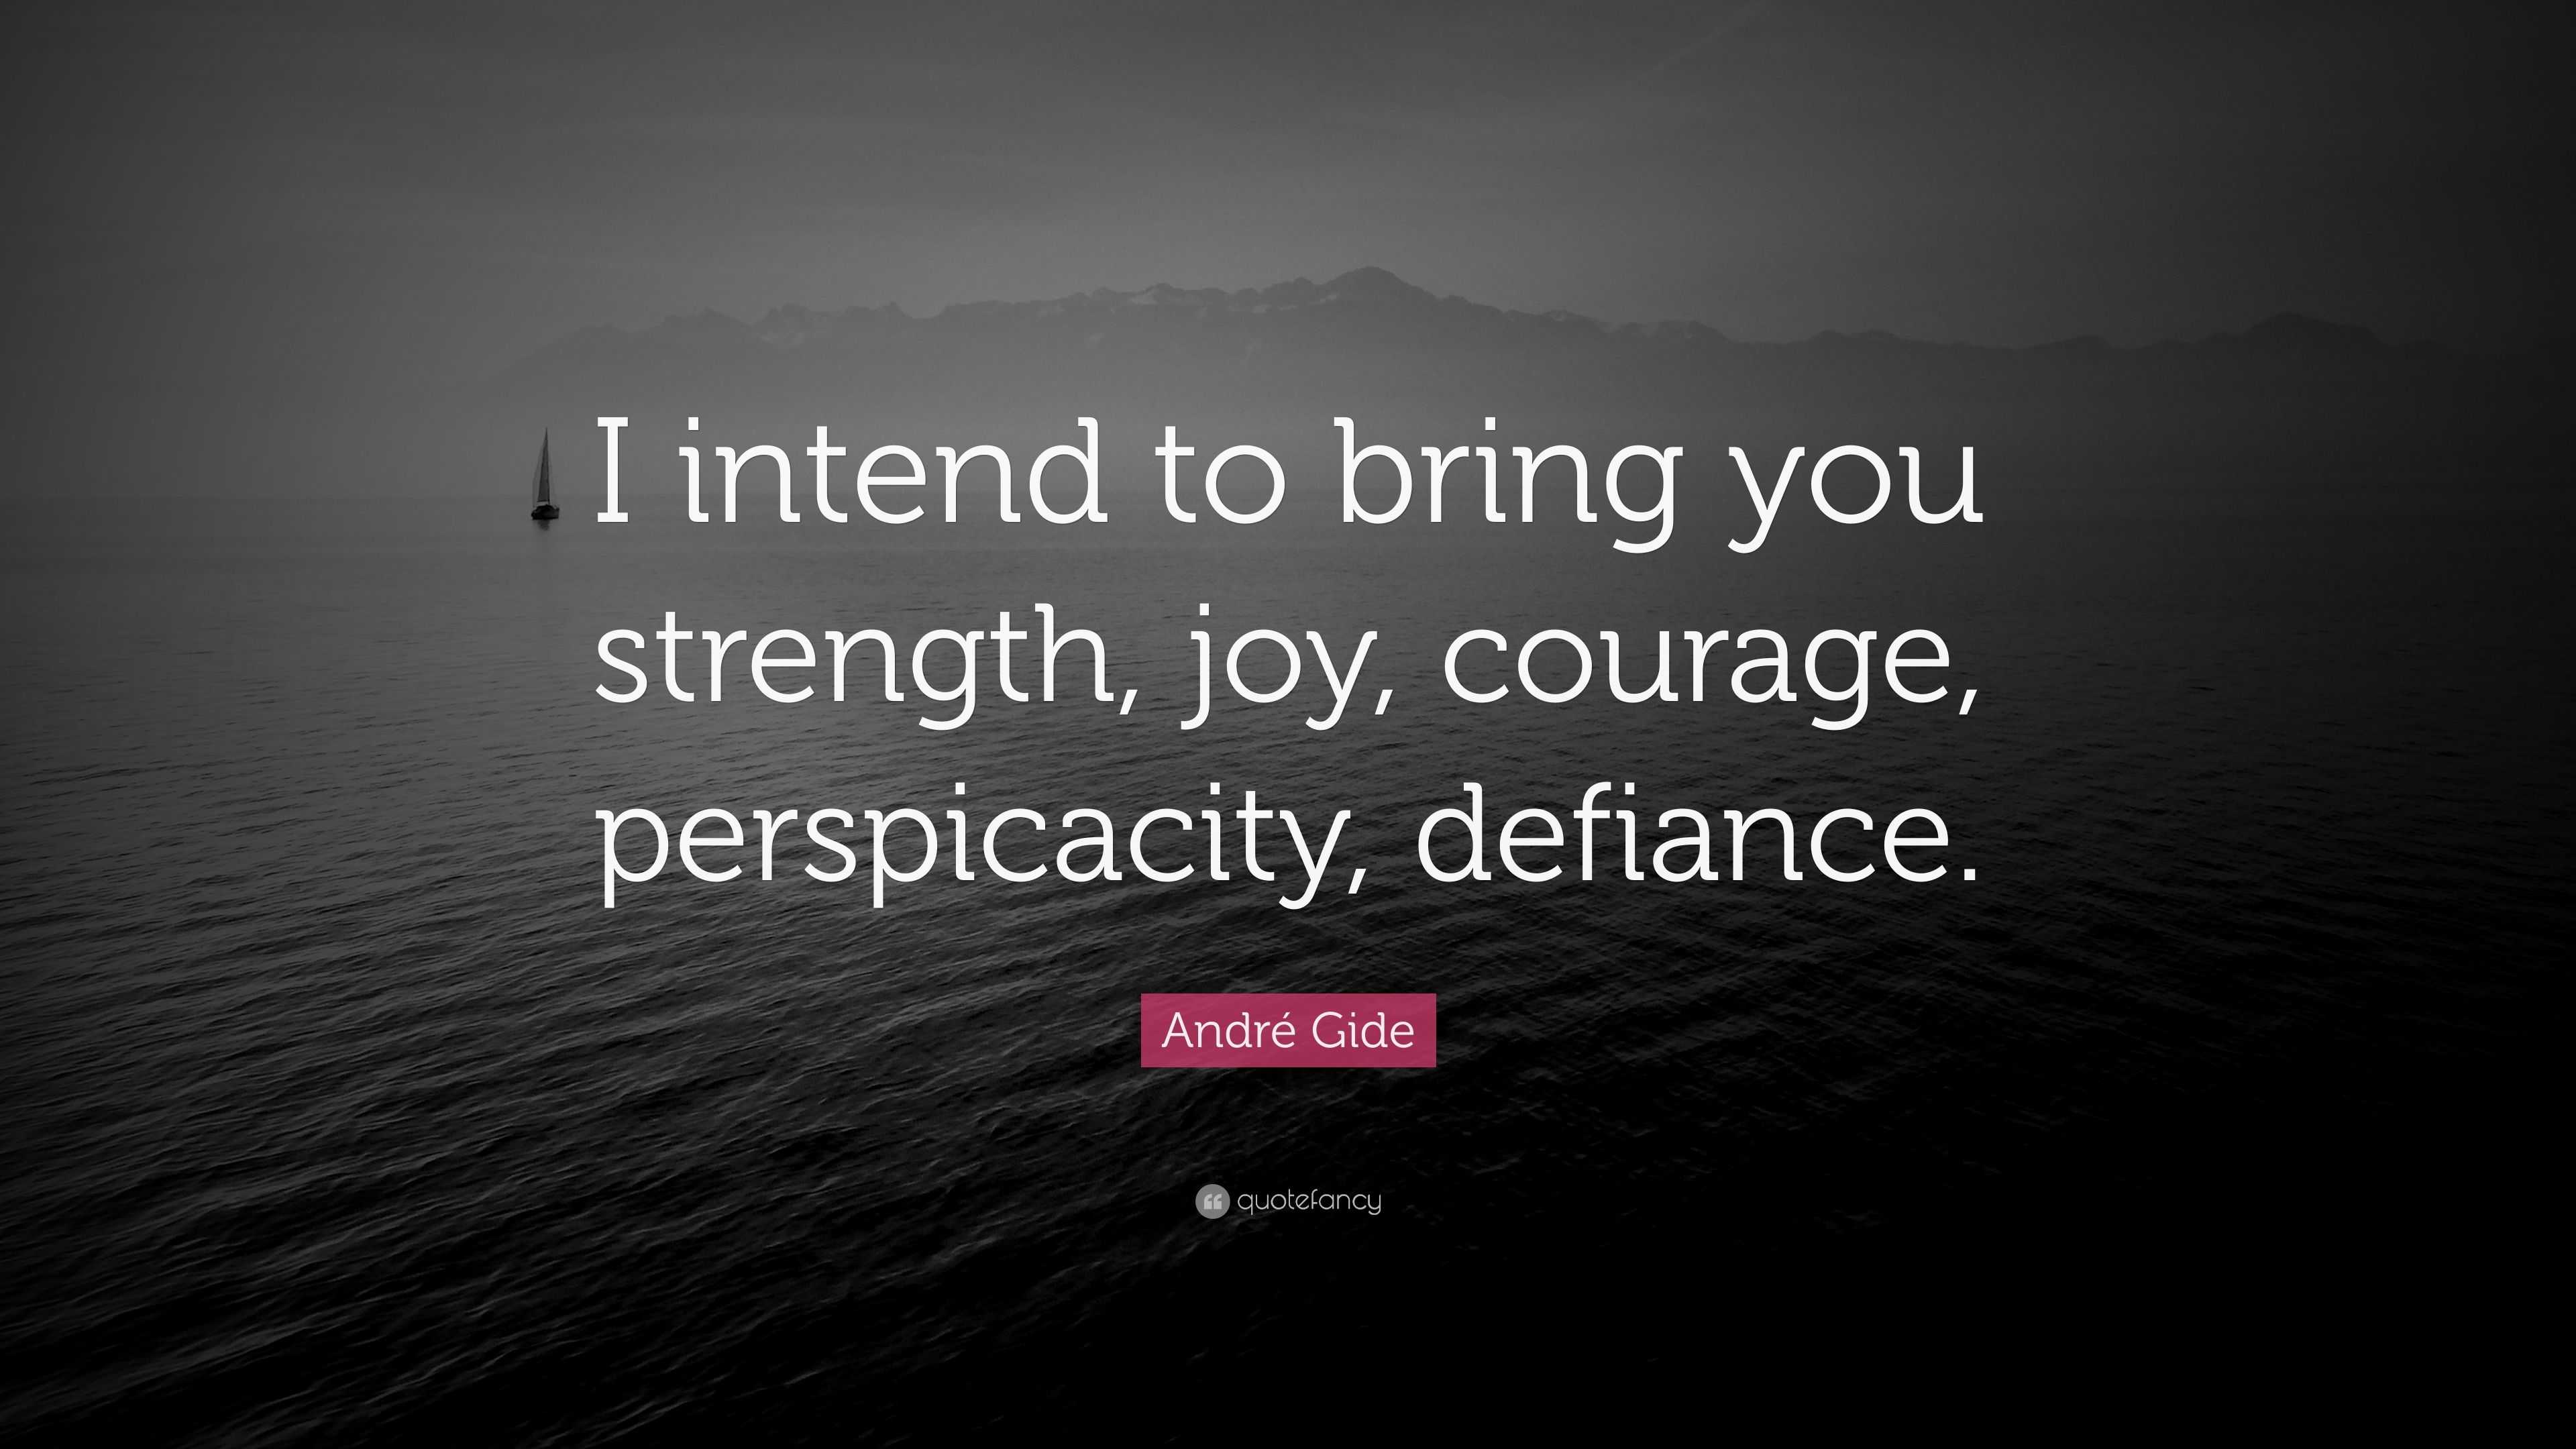 https://quotefancy.com/media/wallpaper/3840x2160/3649093-Andr-Gide-Quote-I-intend-to-bring-you-strength-joy-courage.jpg